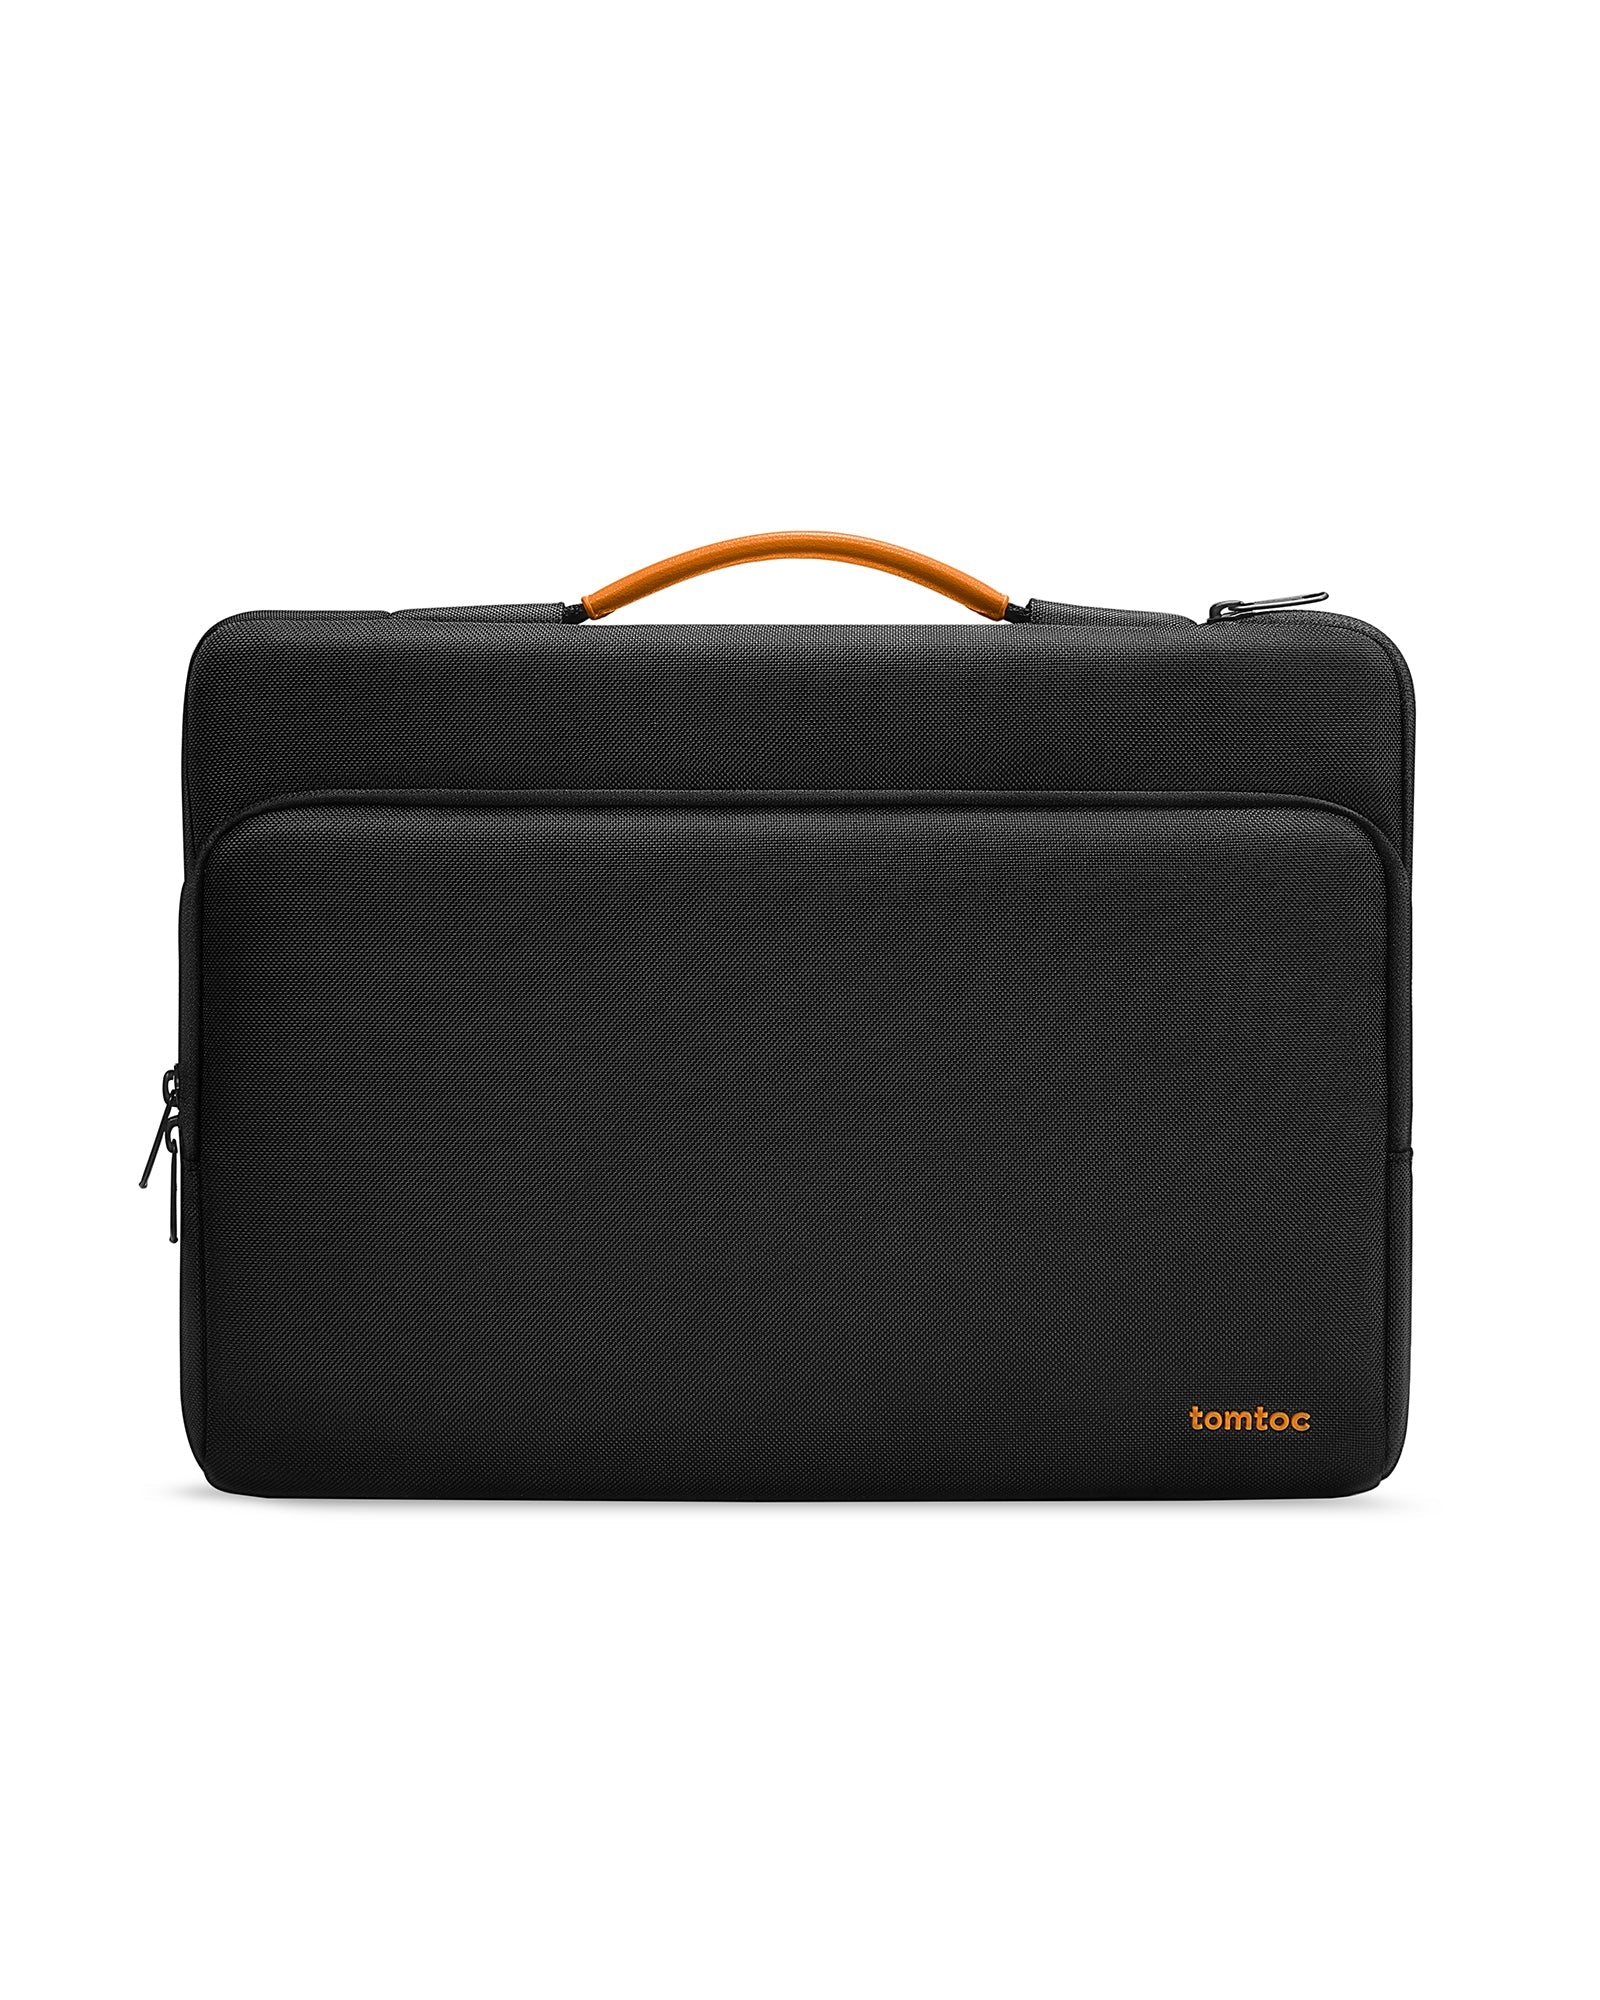 tomtoc 360 Protective Laptop Carrying Case for 13-inch MacBook Air M3/